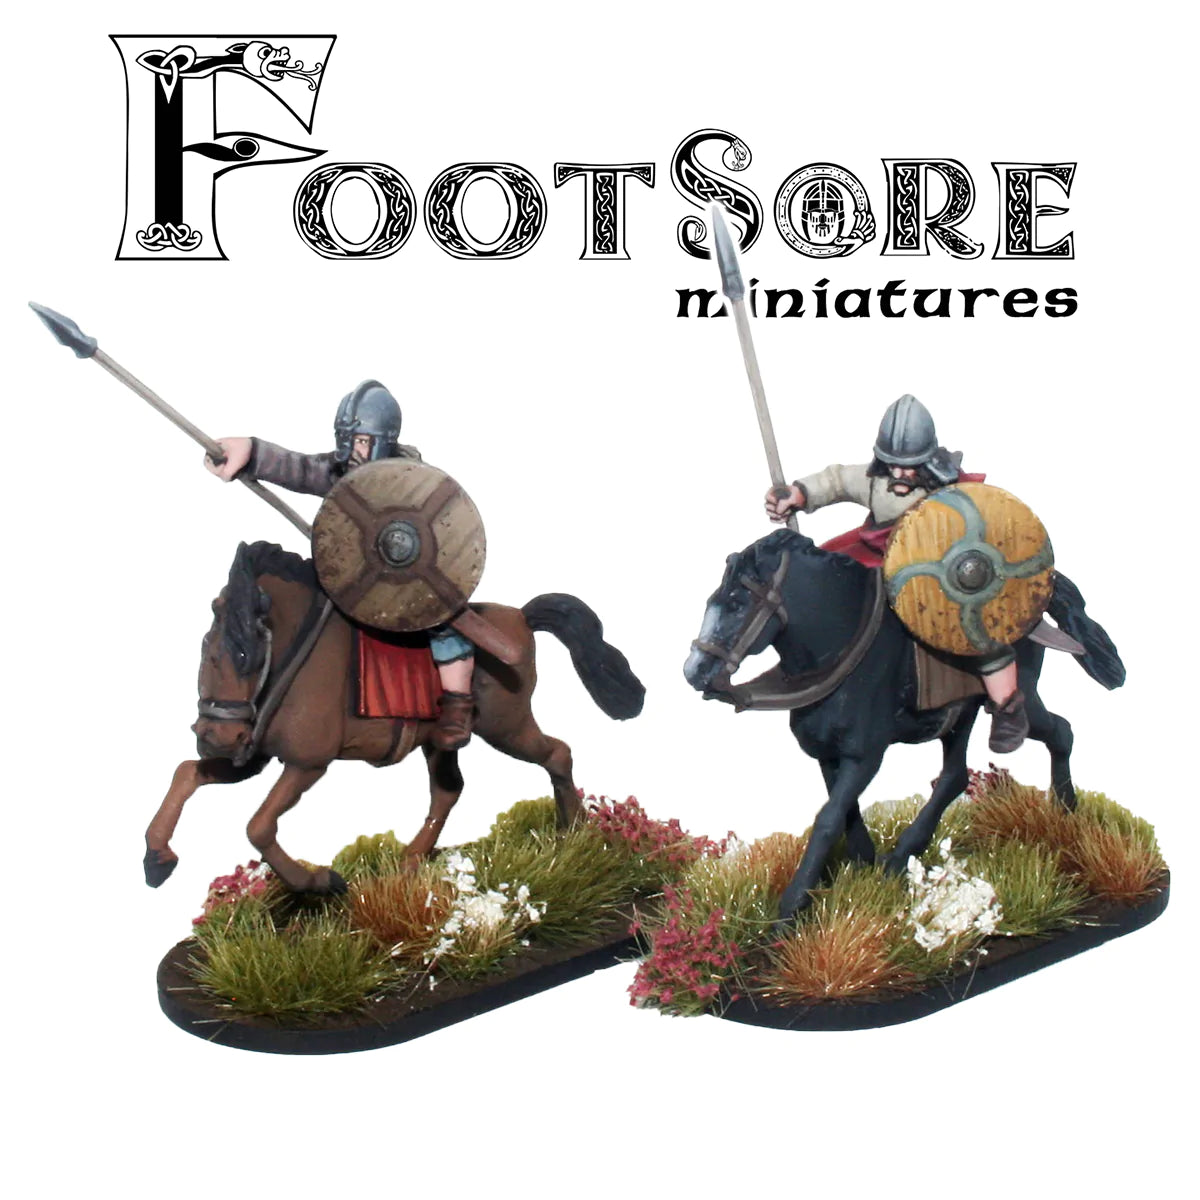 WLS207HS Welsh Cavalry with Spears Footsore Barons War 28mm